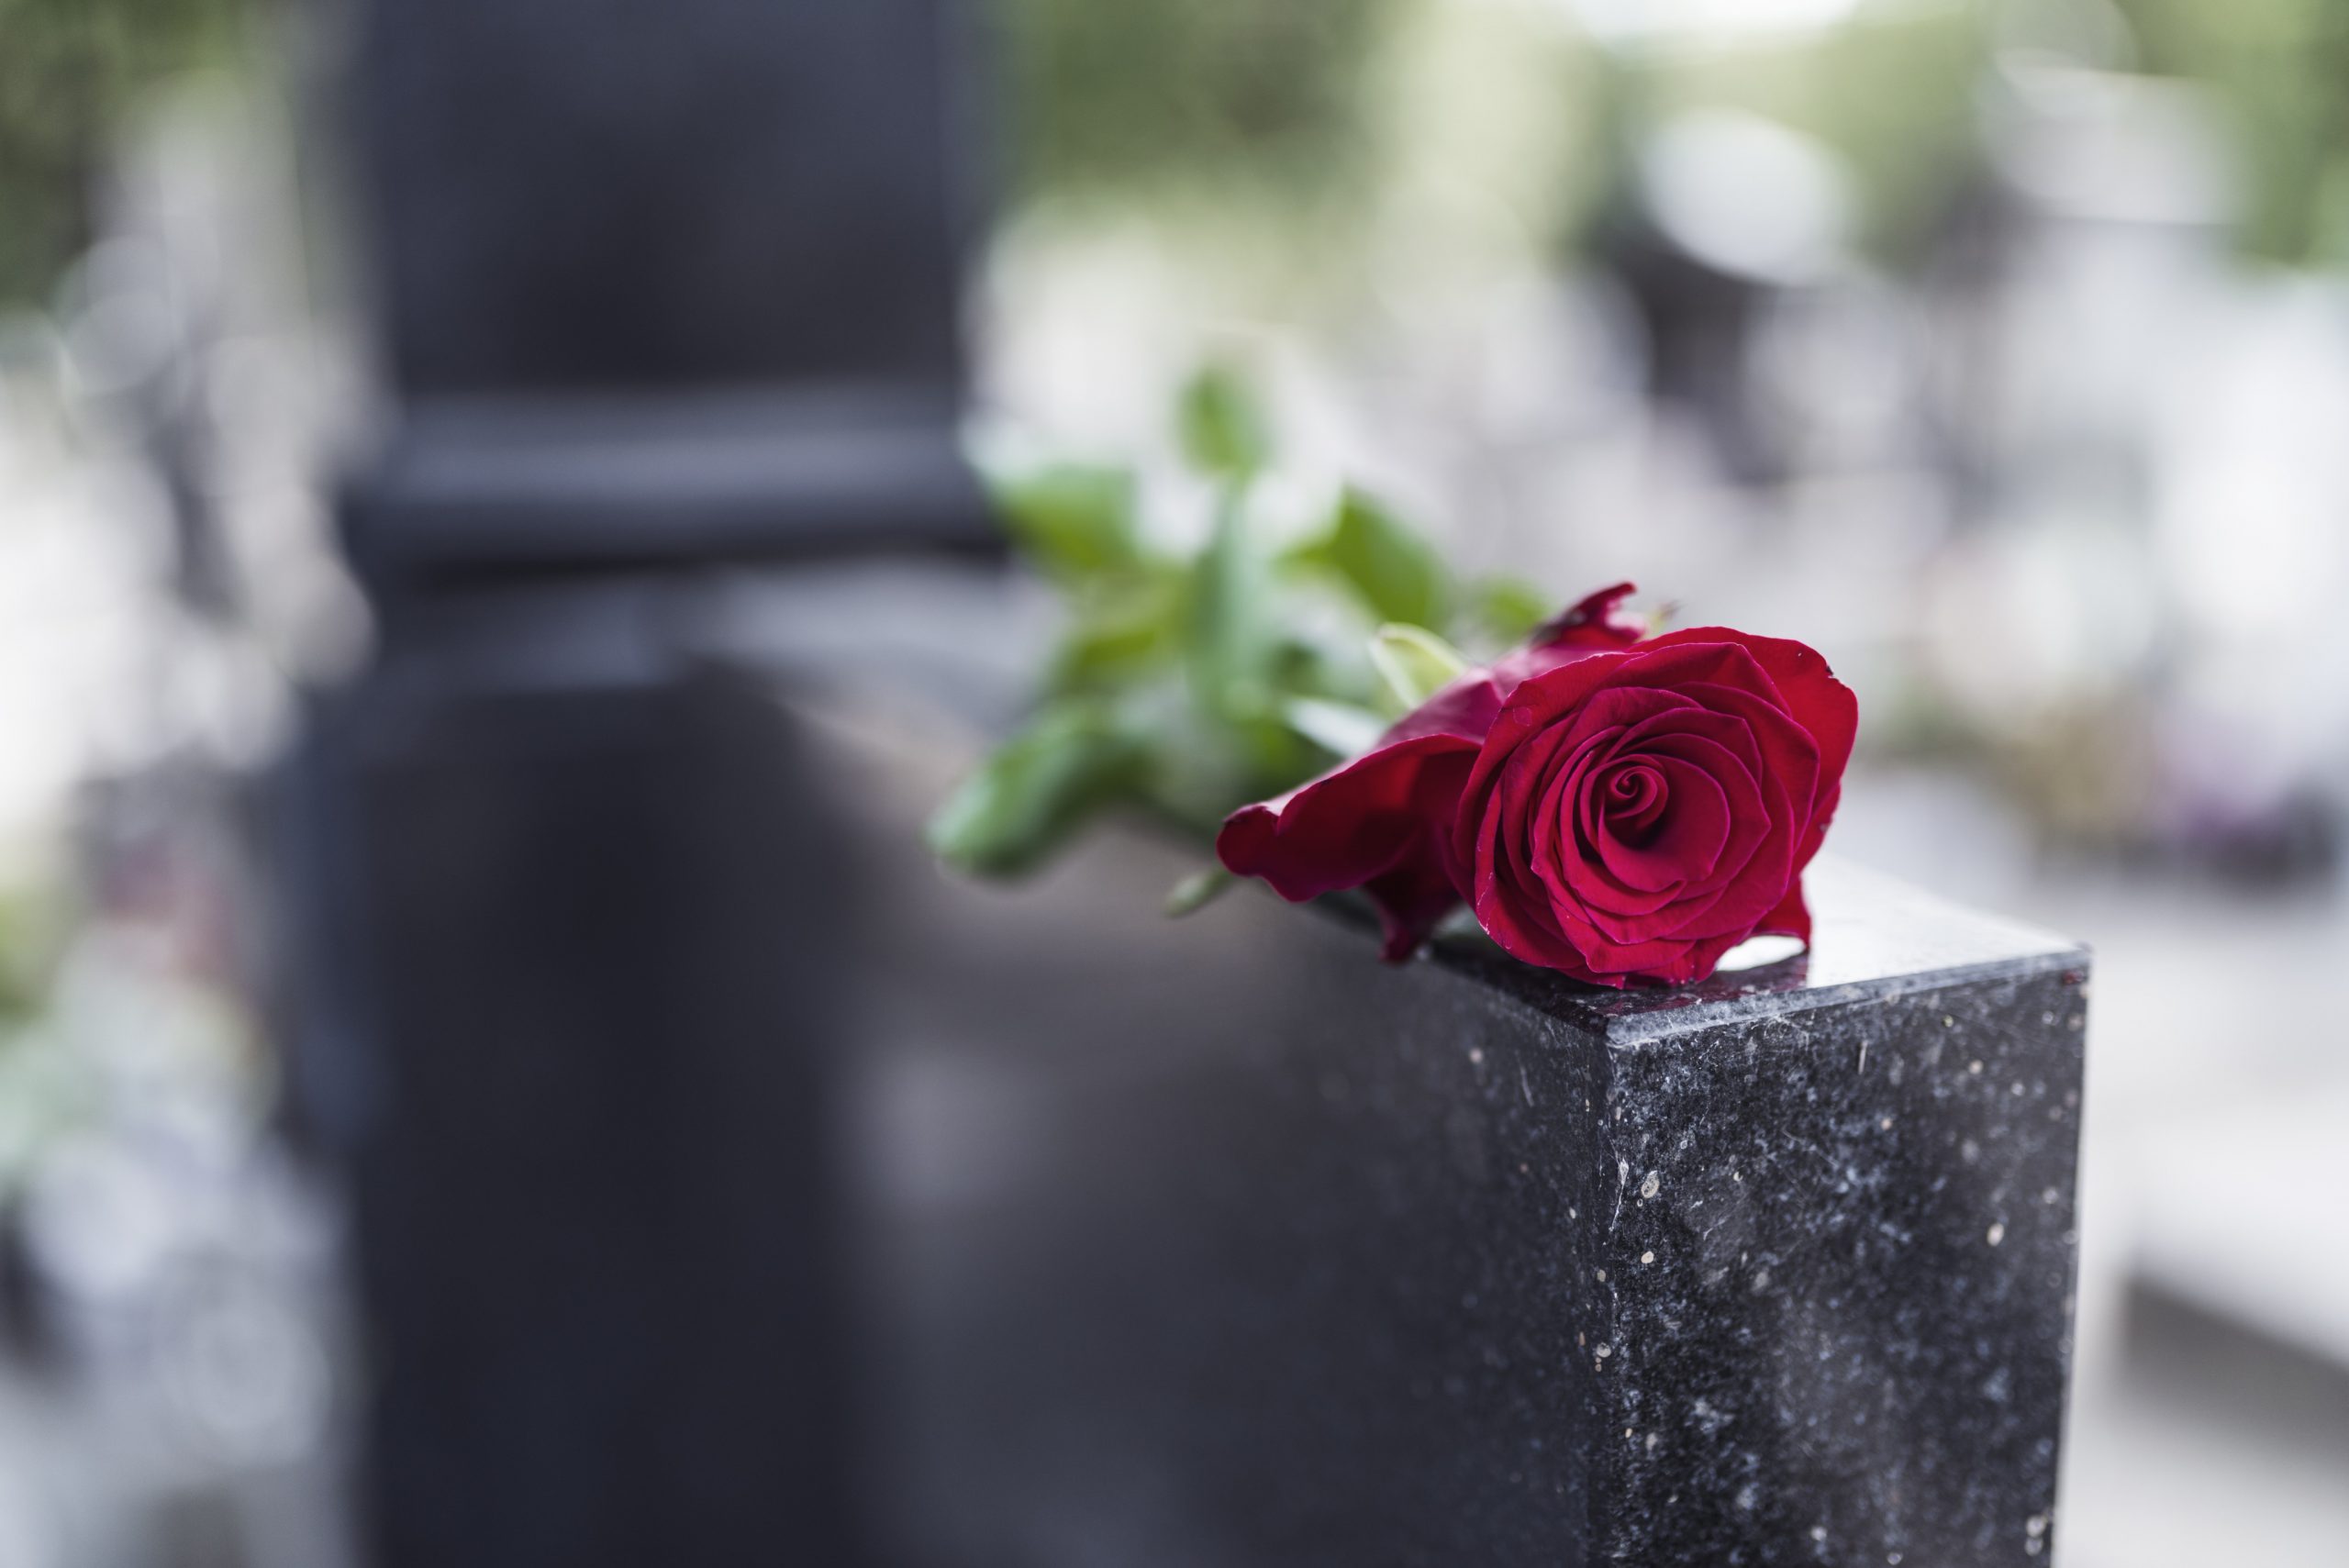 How Do I Know If I Have A Wrongful Death Case?